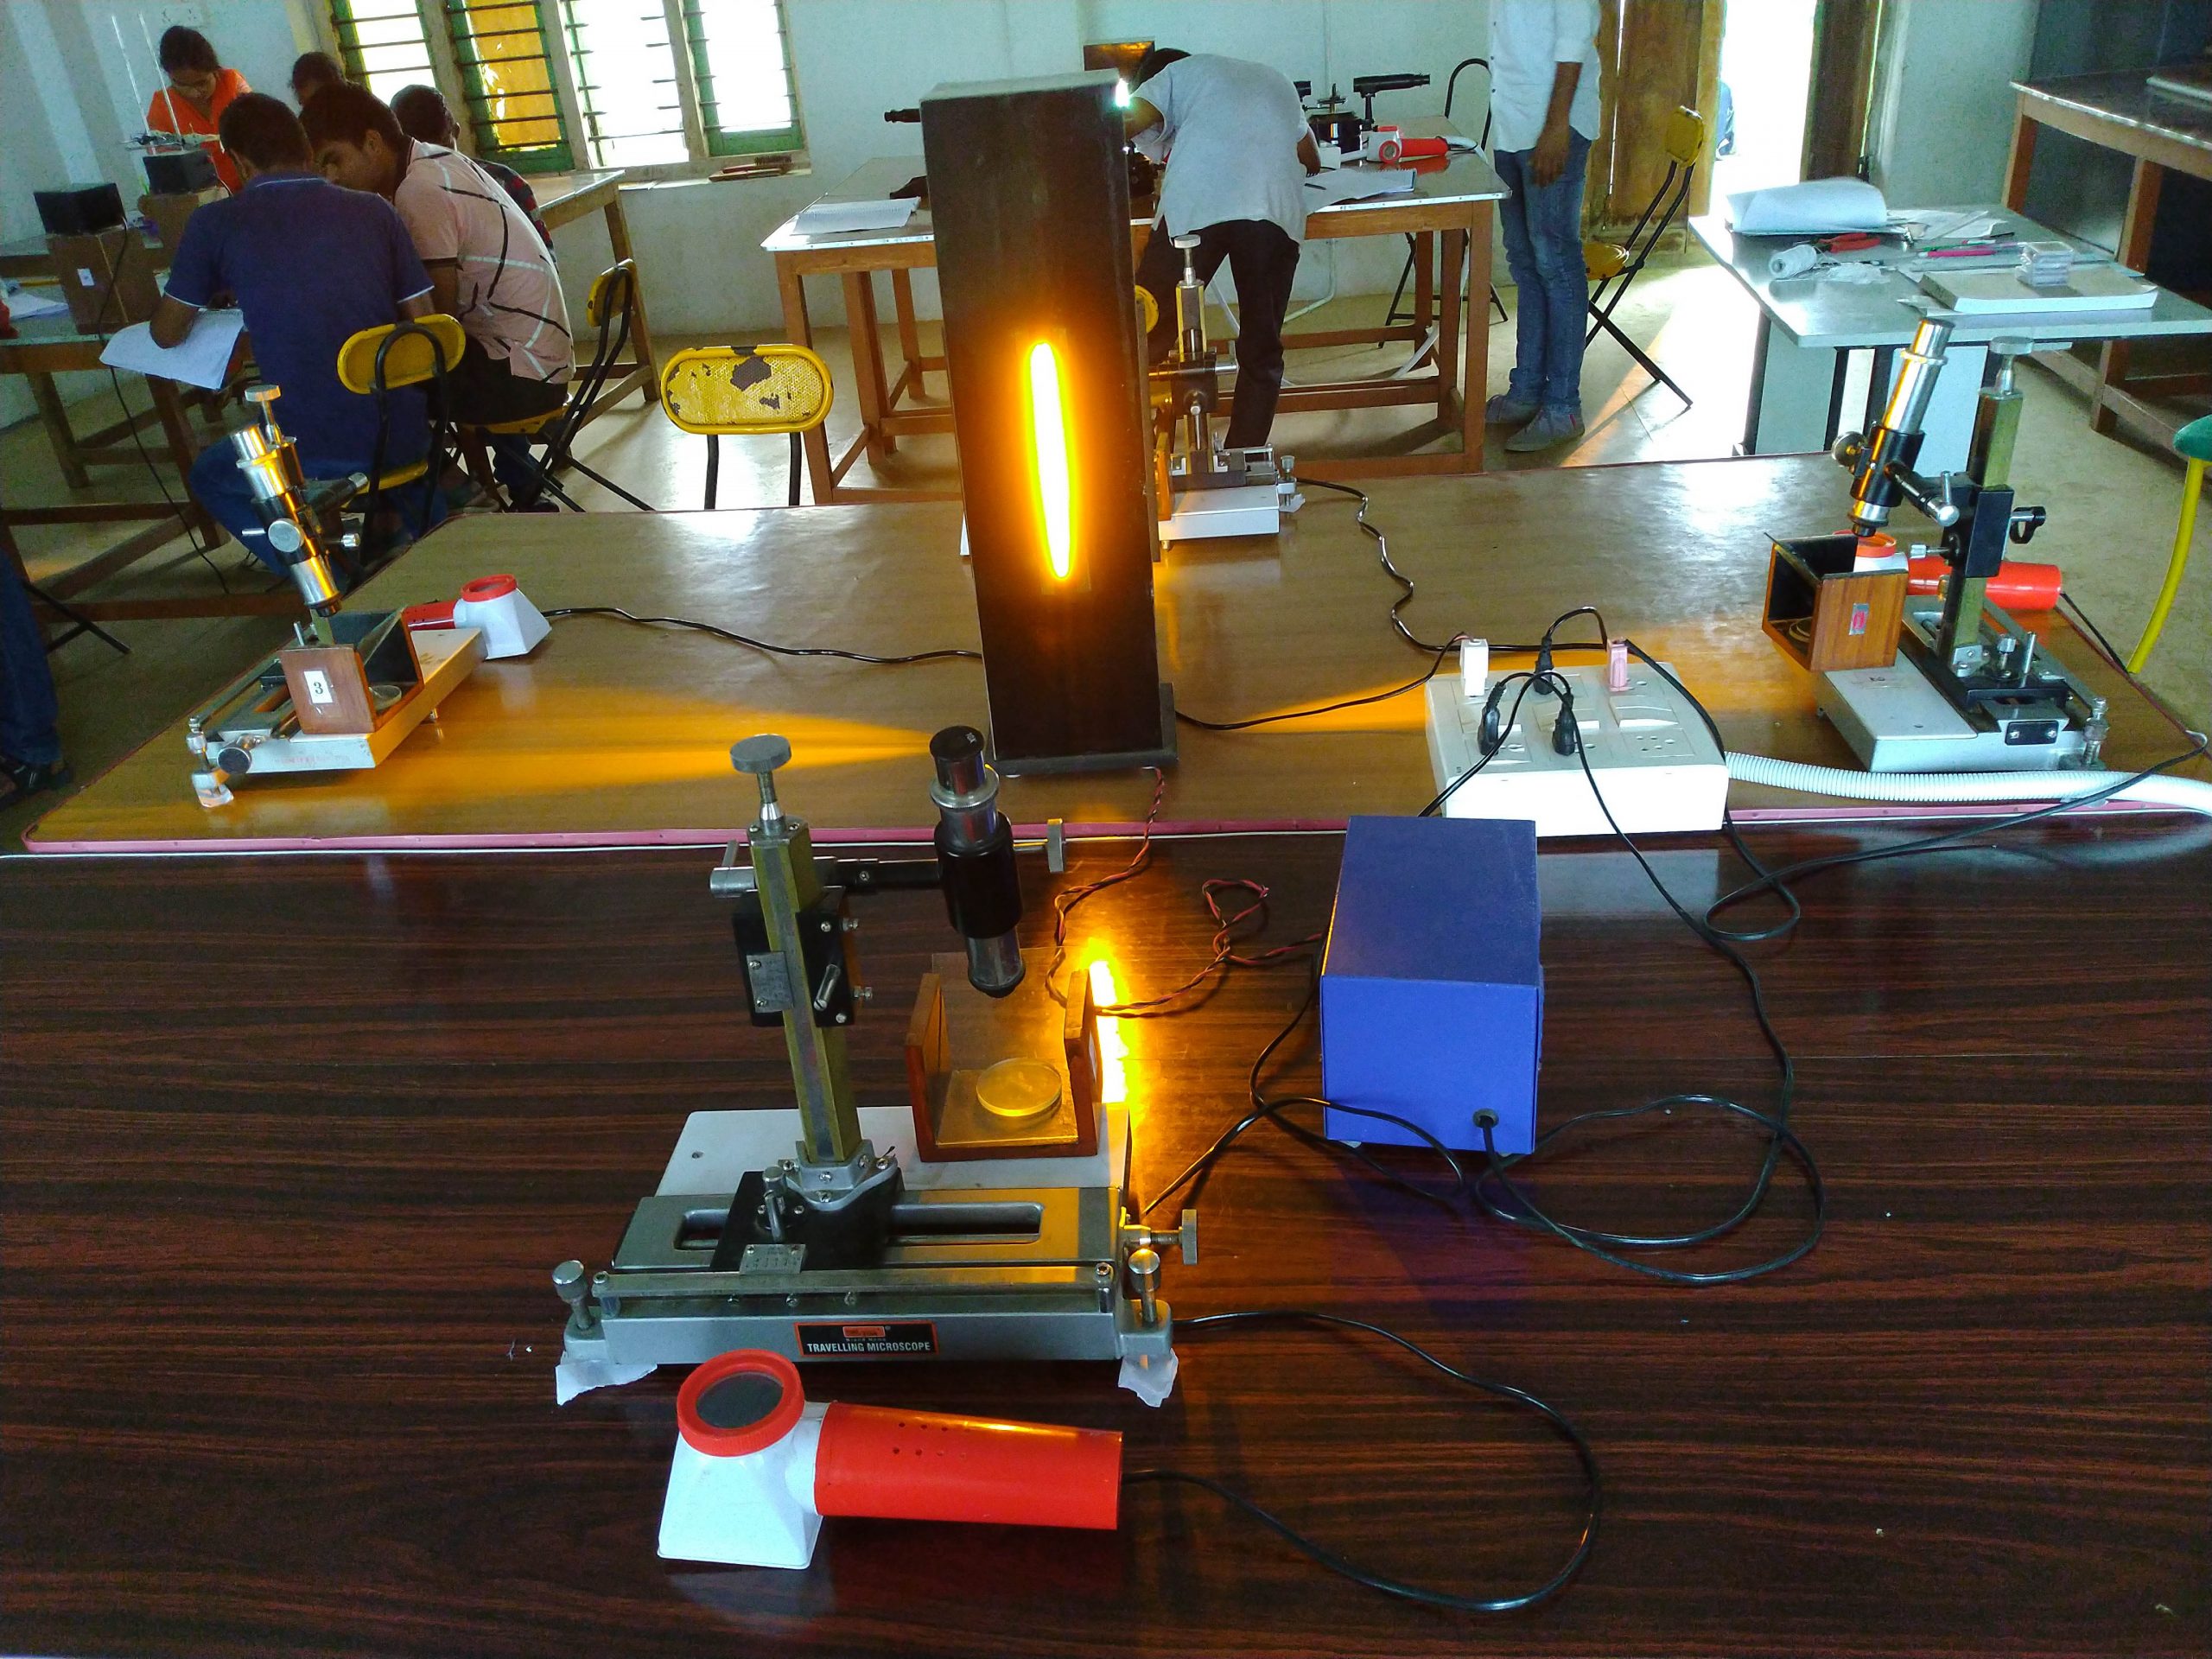 NIT Andhra Pradesh Students at a laboratory in the Campus